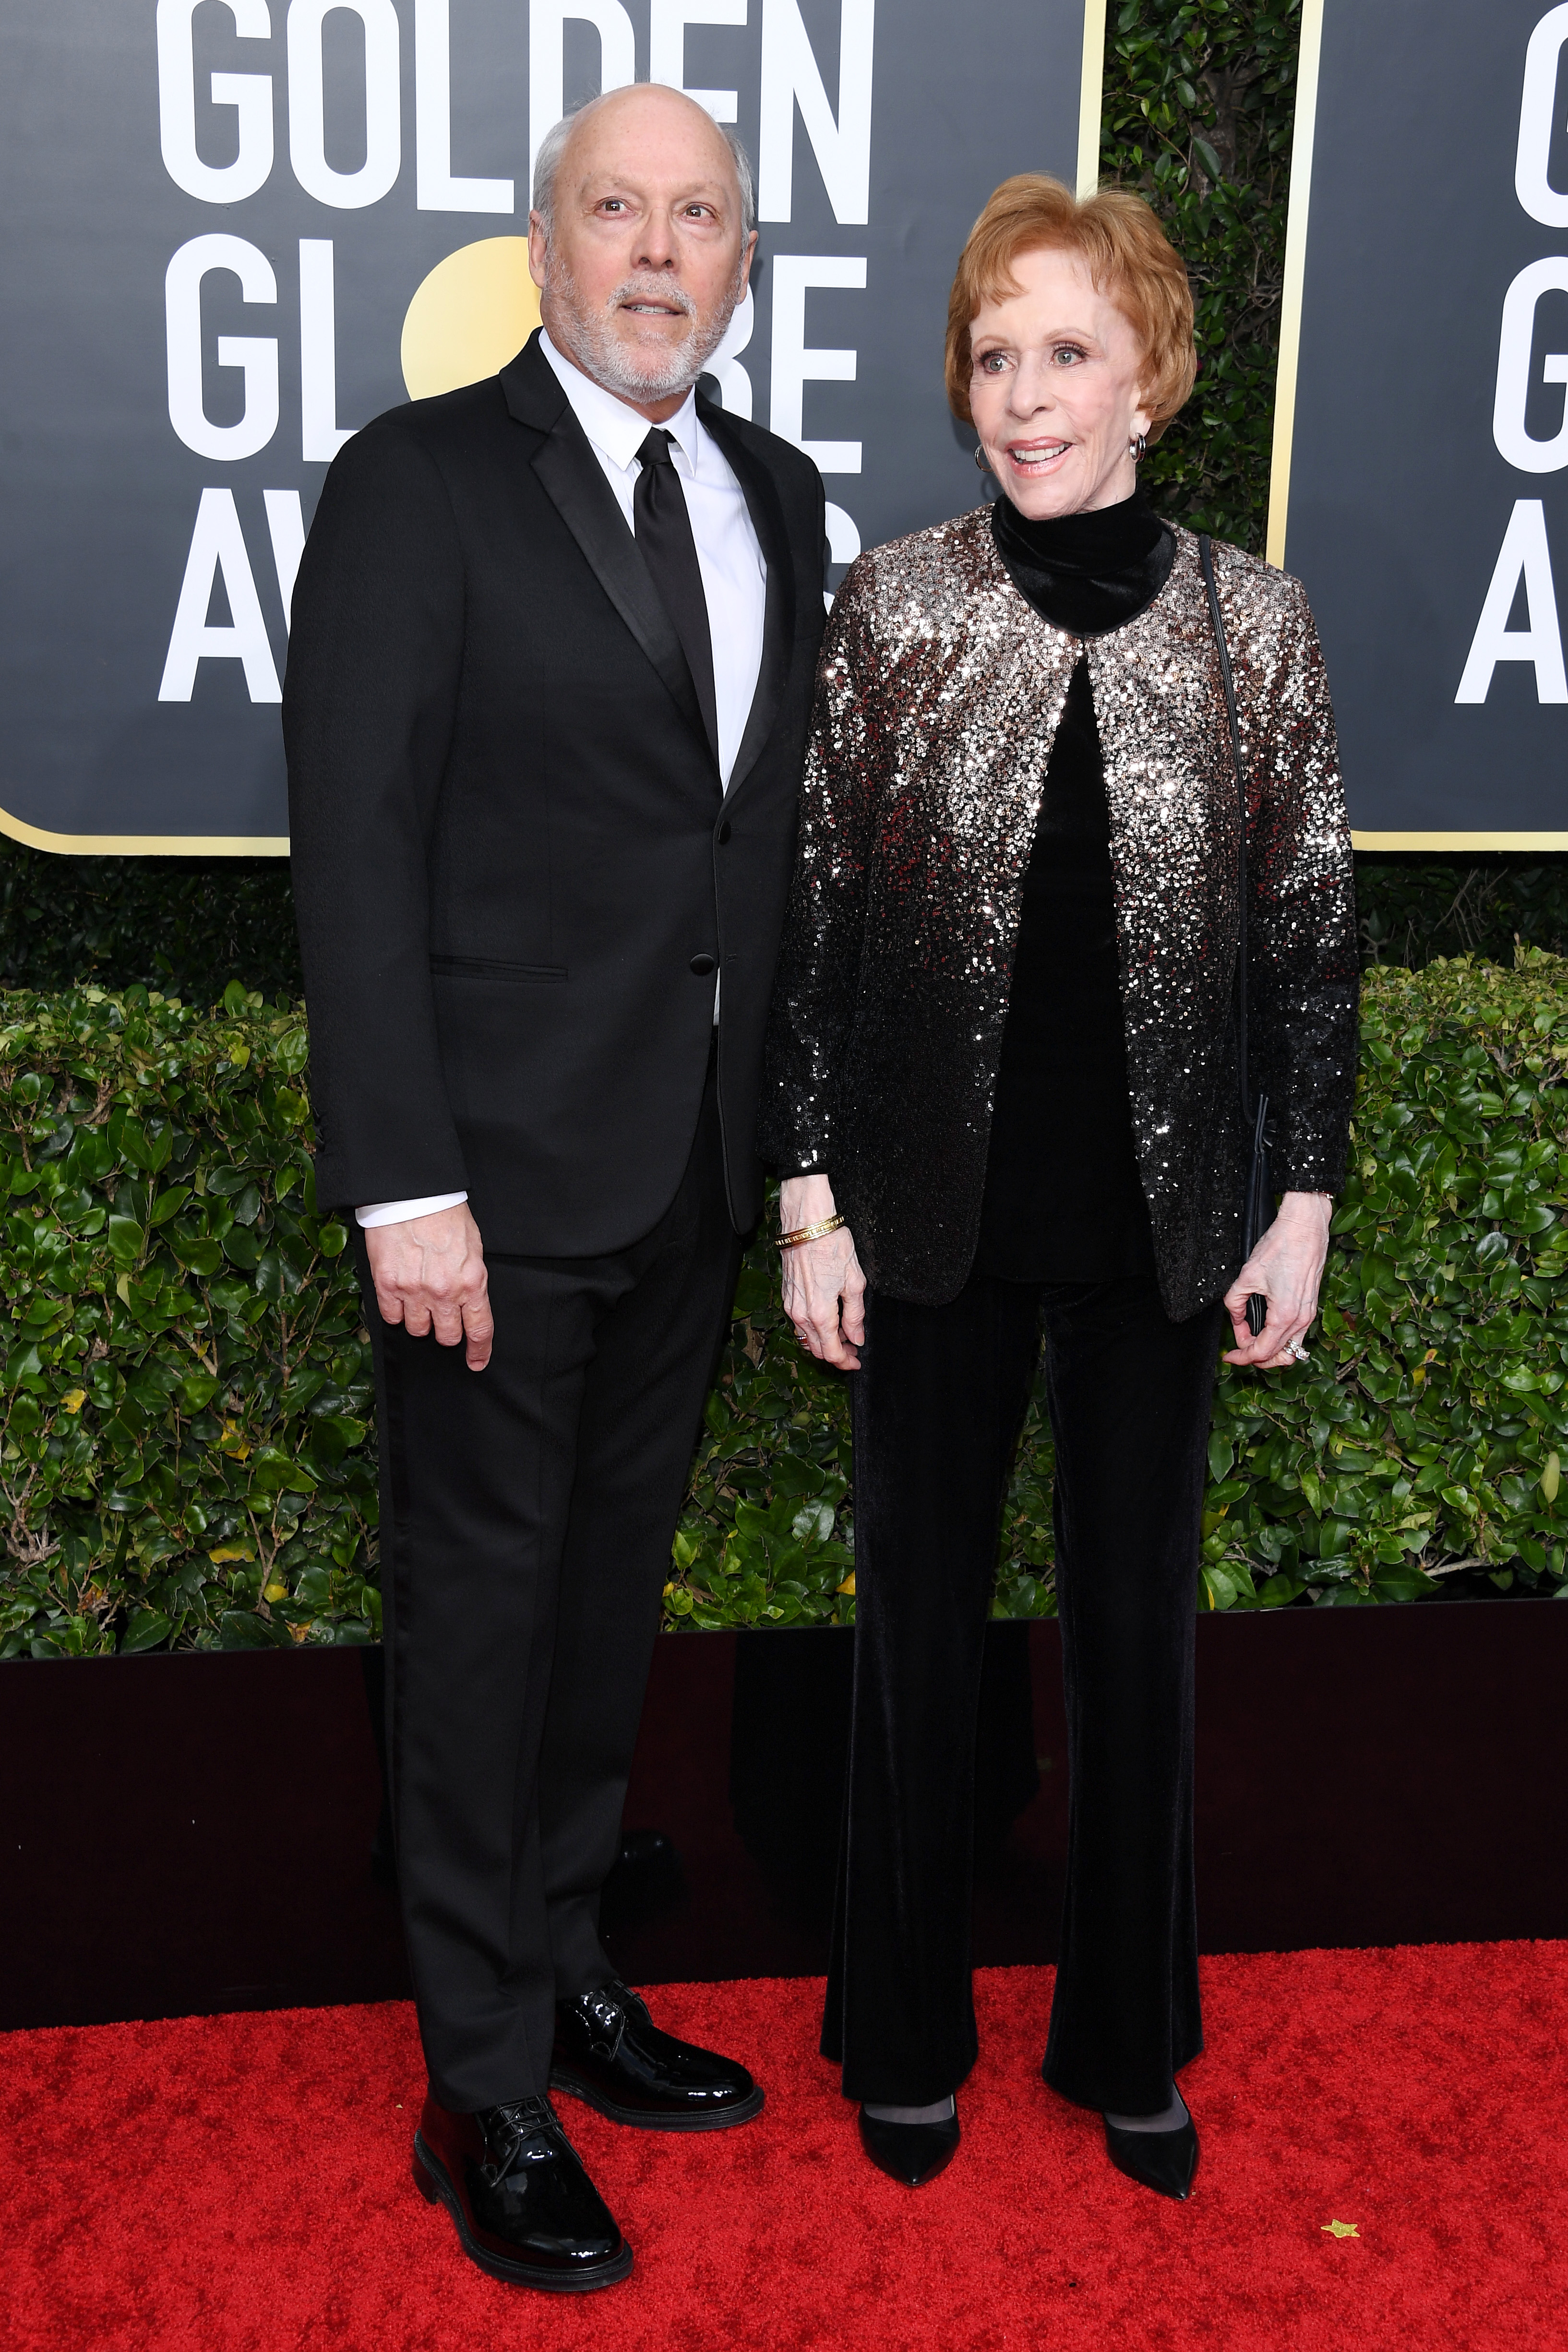 Musician Brian Miller and his wife Carol Burnett attend the 77th Annual Golden Globe Awards at The Beverly Hilton Hotel on January 5, 2020 in Beverly Hills, California | Source: Getty Images